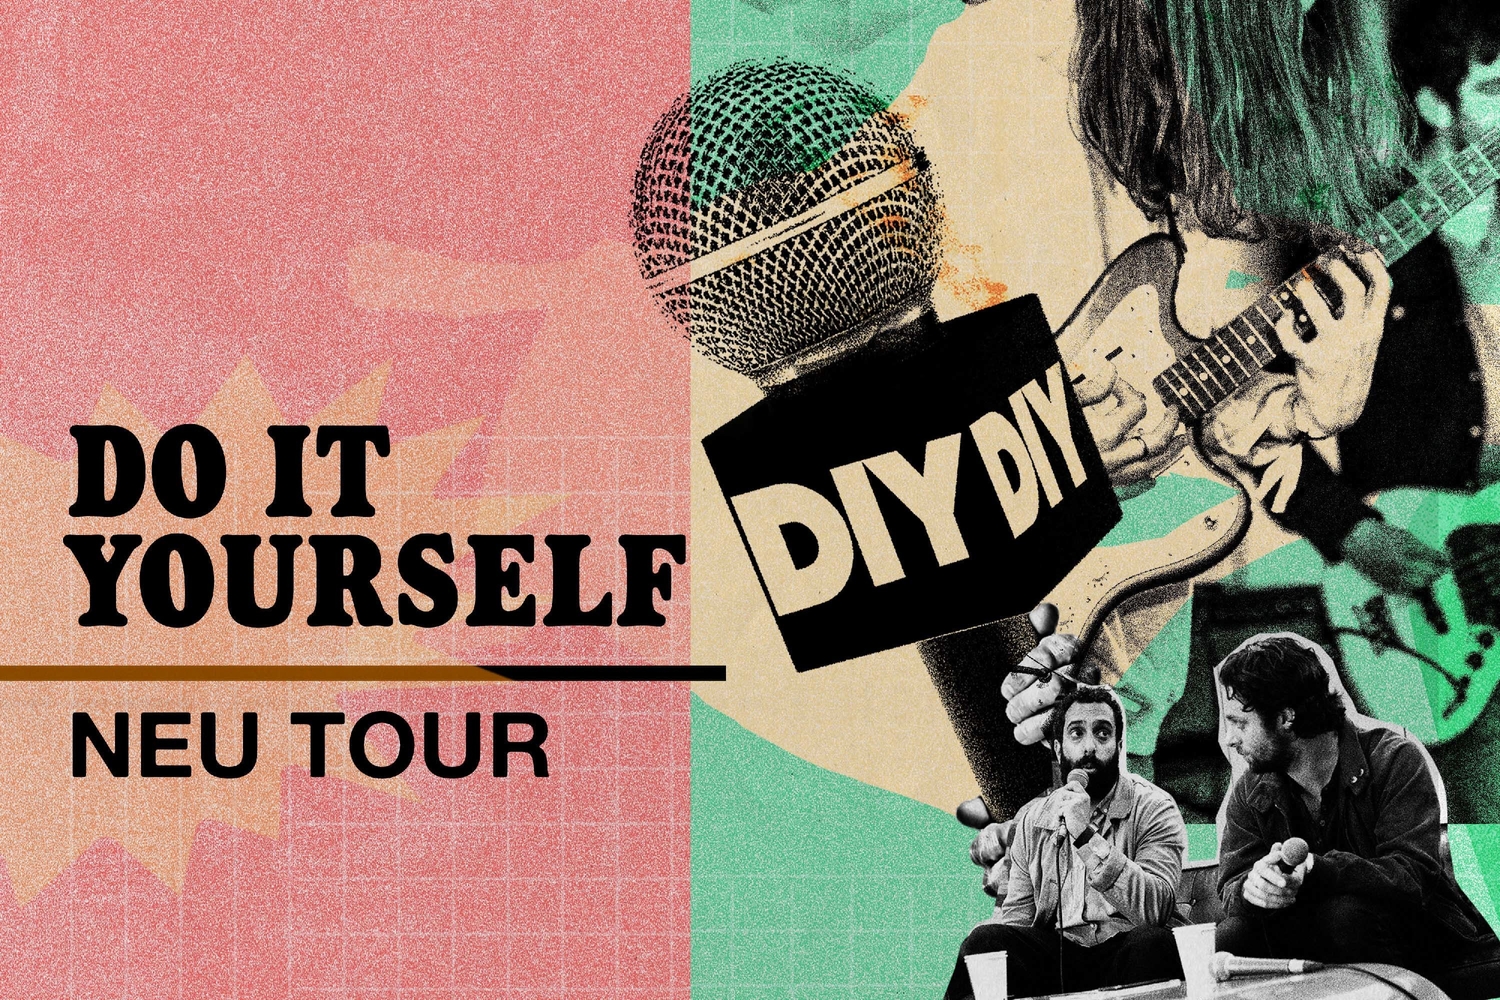 Peace, Pulled Apart by Horses, Dirty Hit, Live at Leeds and lots more to speak at DIY’s Do It Yourself Neu Tour!